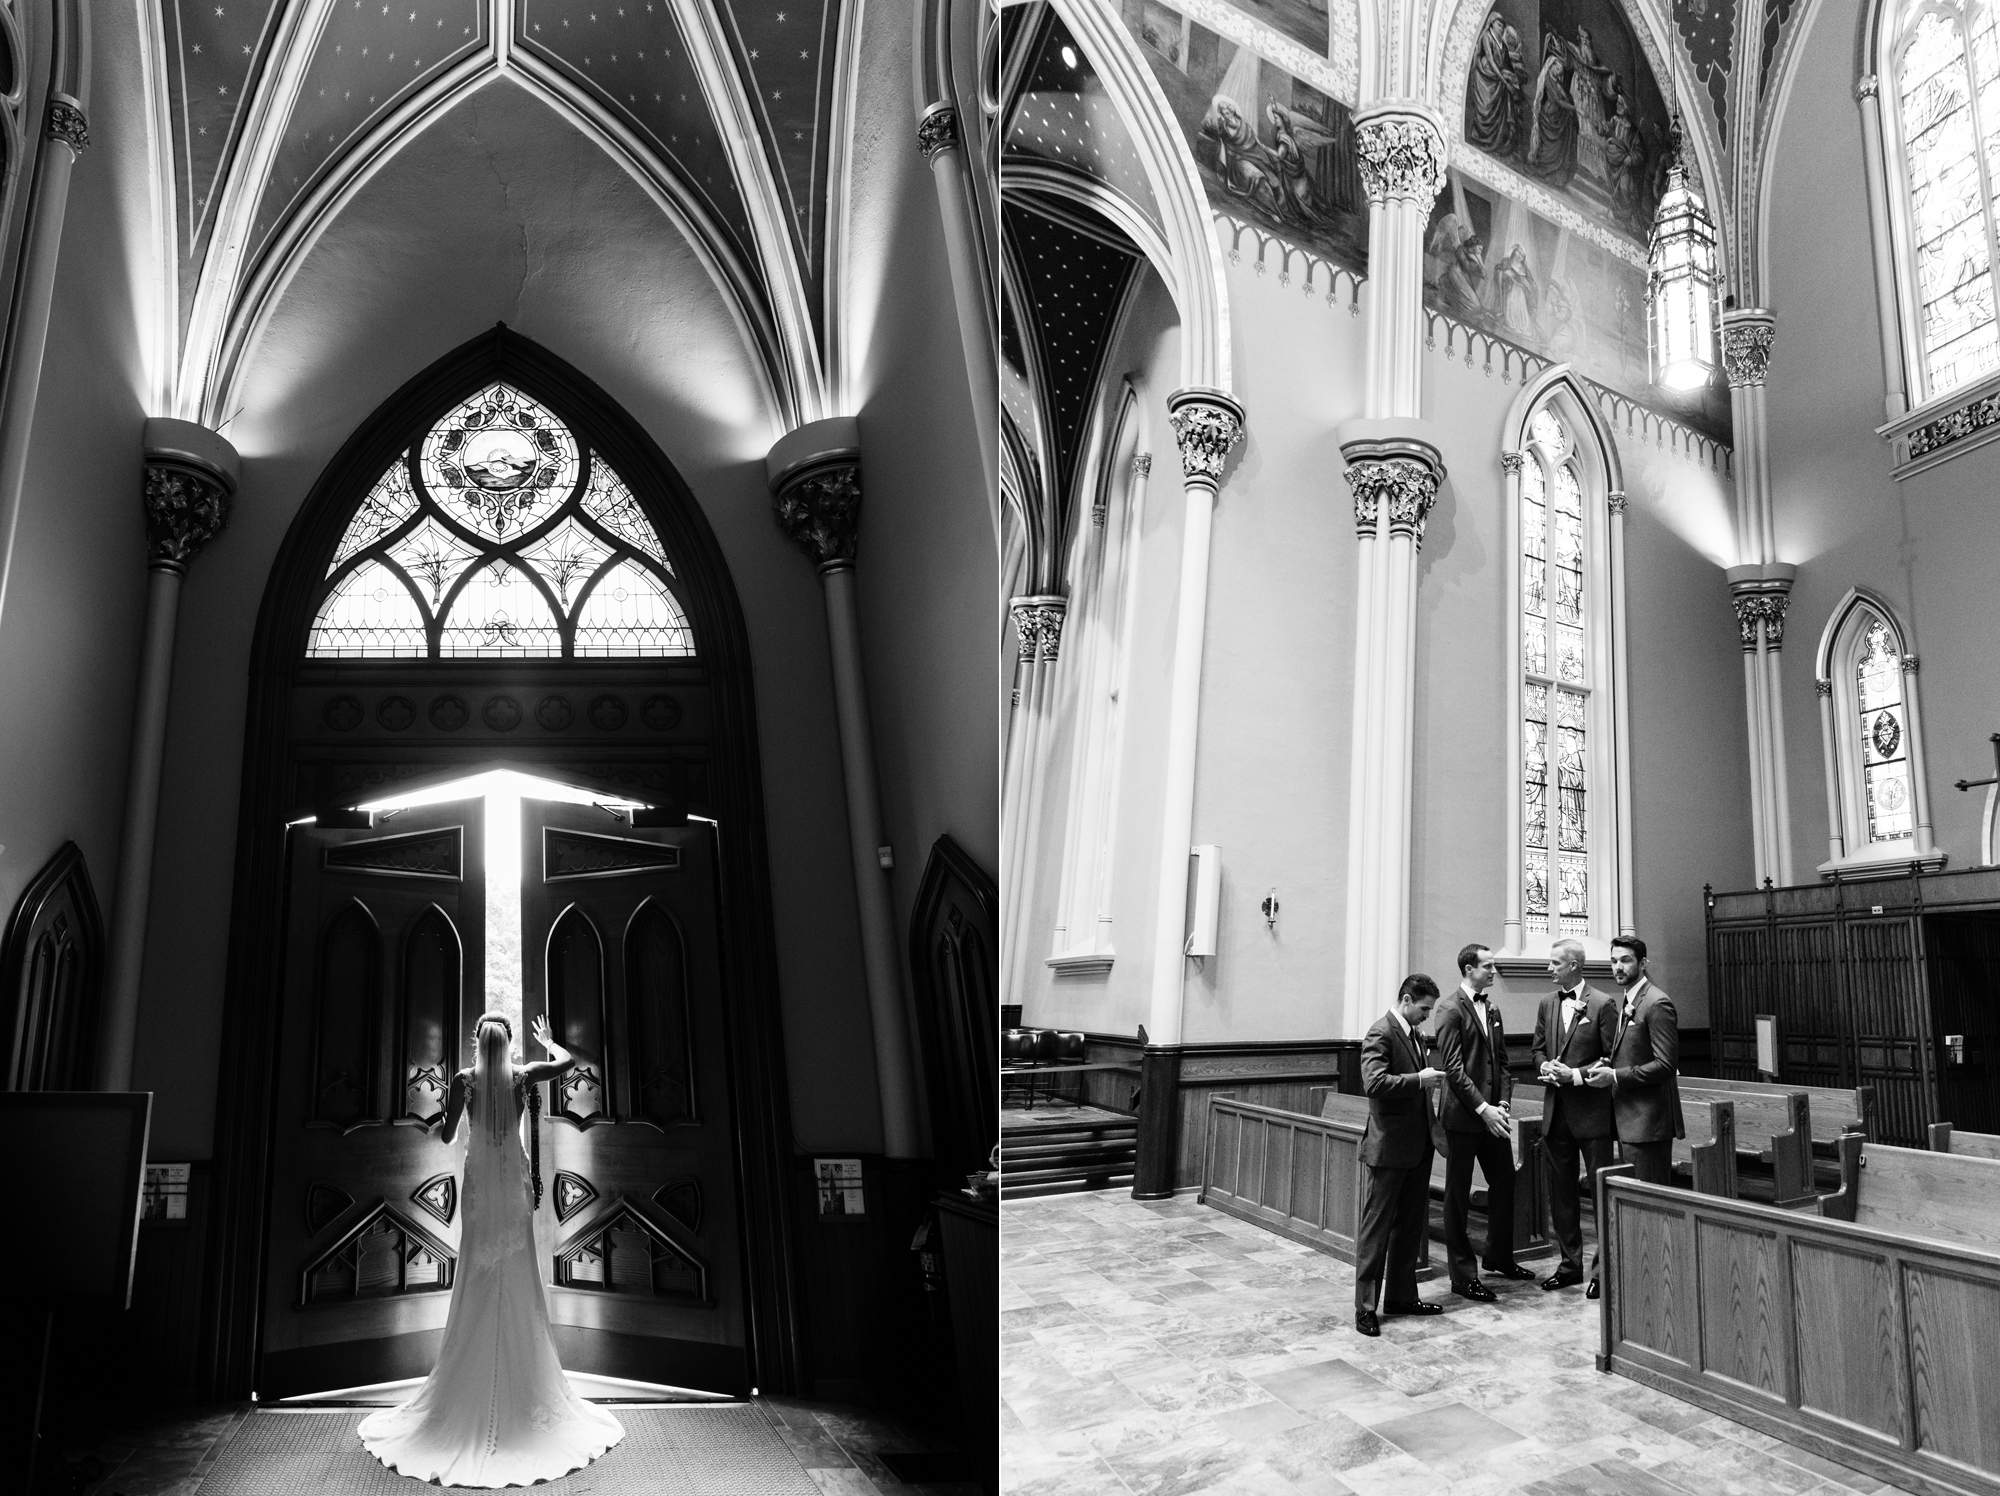 Bride & Groom before their wedding ceremony at the Basilica of the Sacred Heart on the campus of the University of Notre Dame